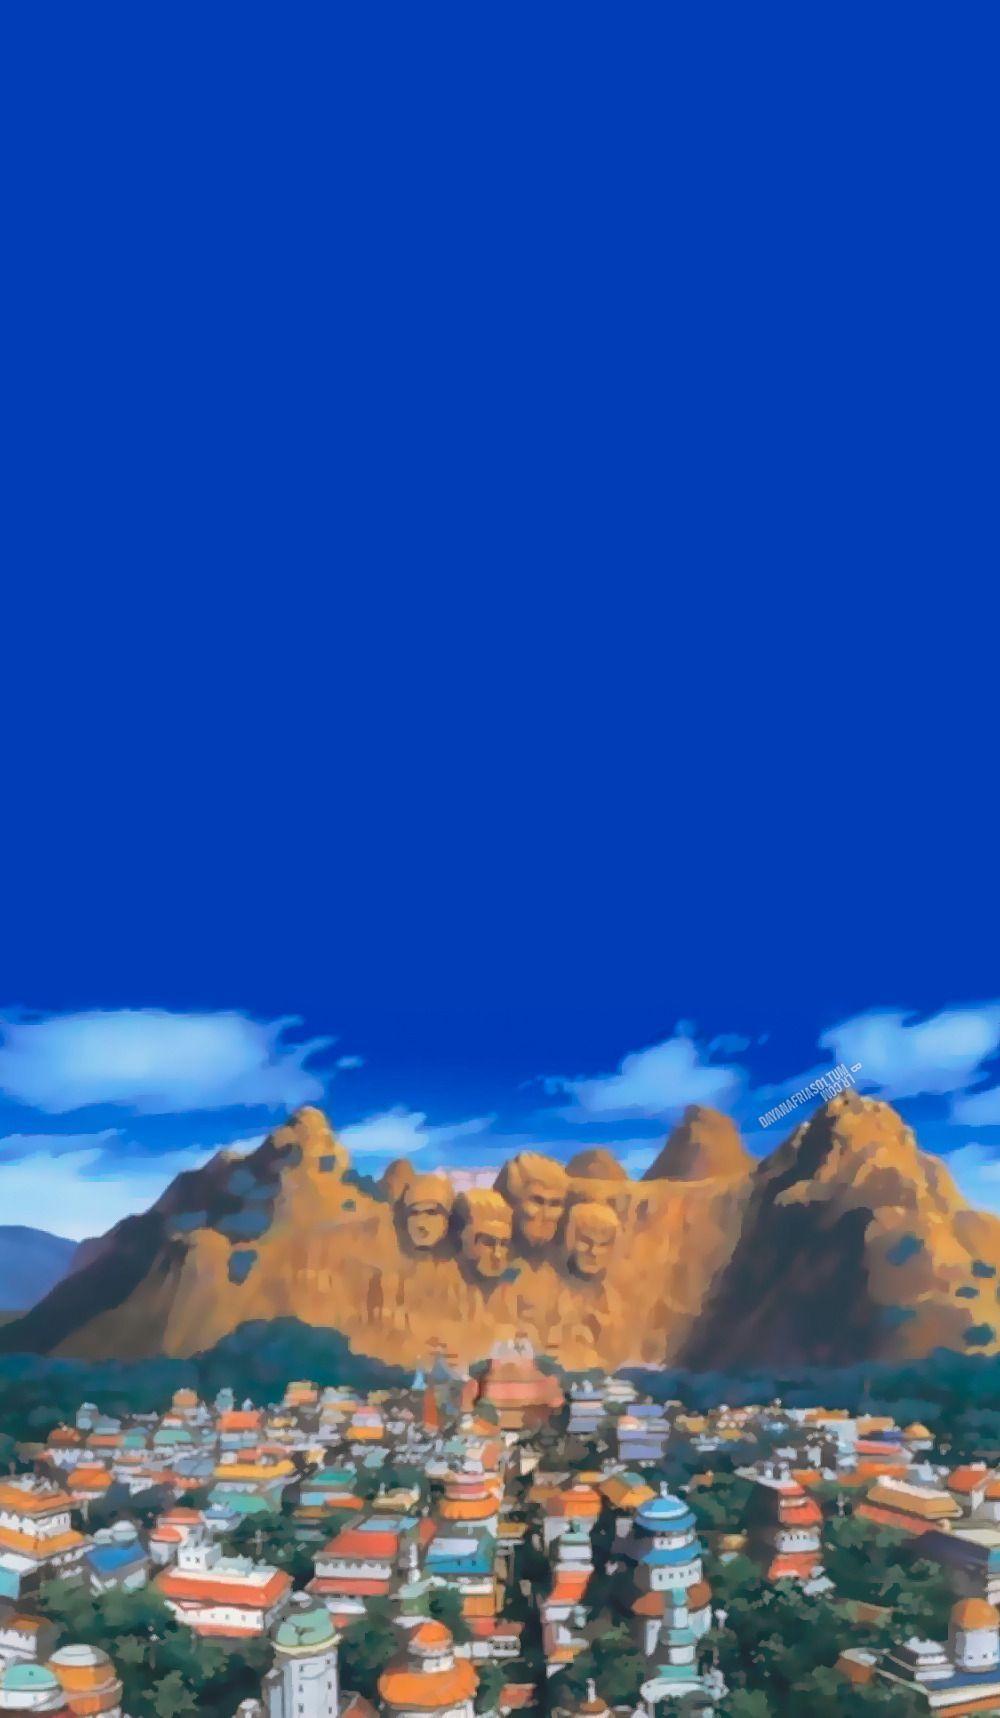 Naruto Landscape Wallpapers - Top Free Naruto Landscape Backgrounds